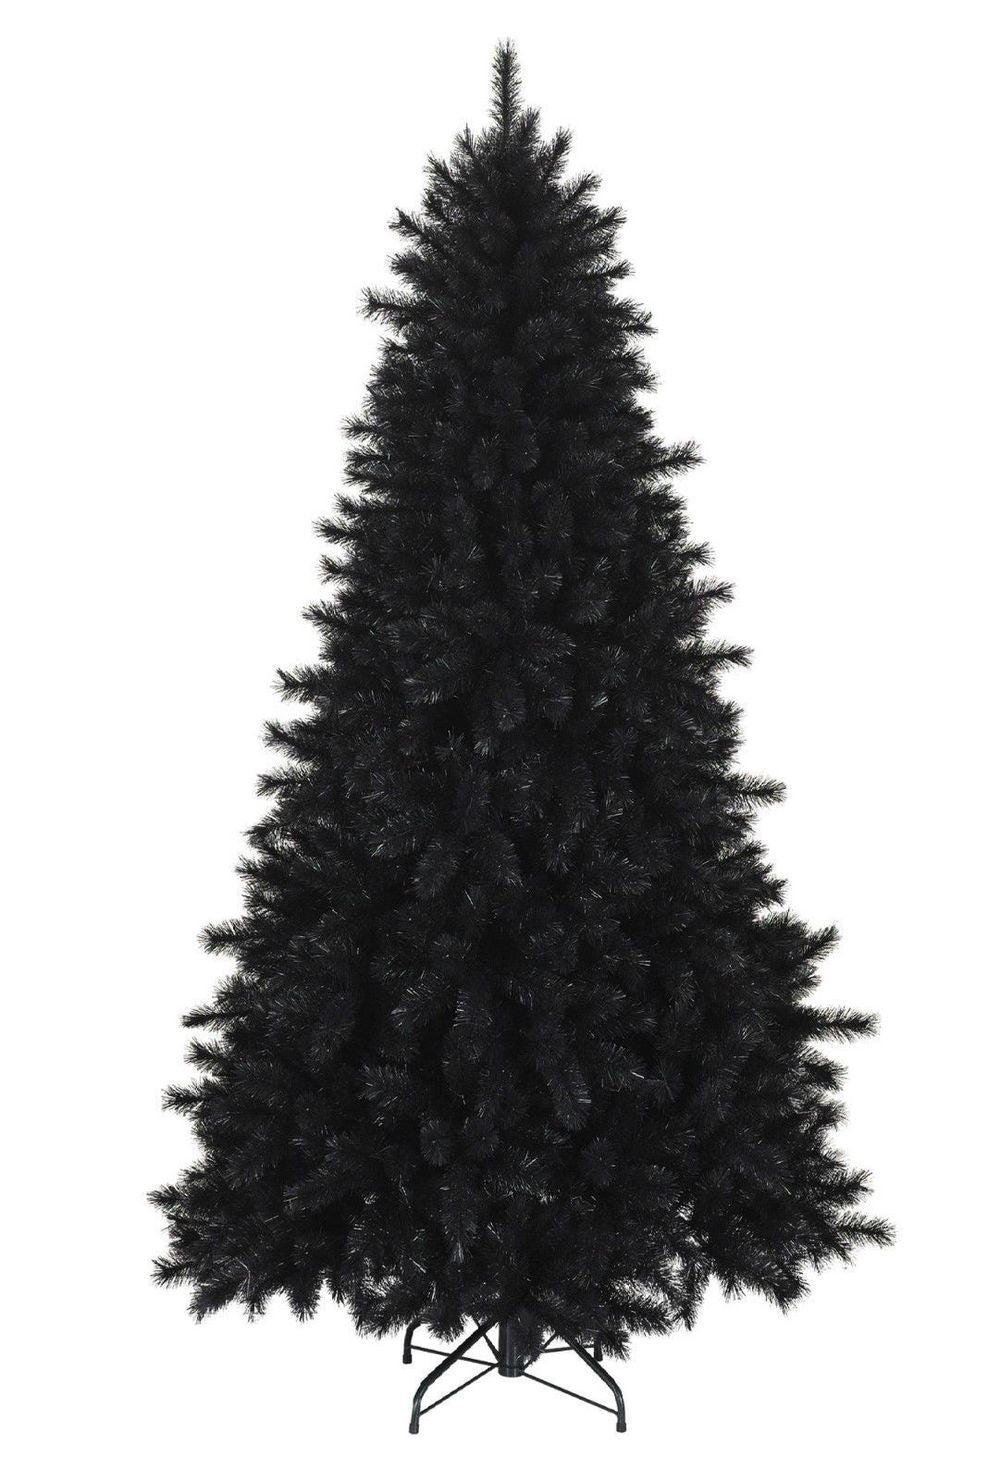 6FT BLACK Colorado ARTIFICIAL Christmas Tree - Metal Stand with Red Pocket Bag